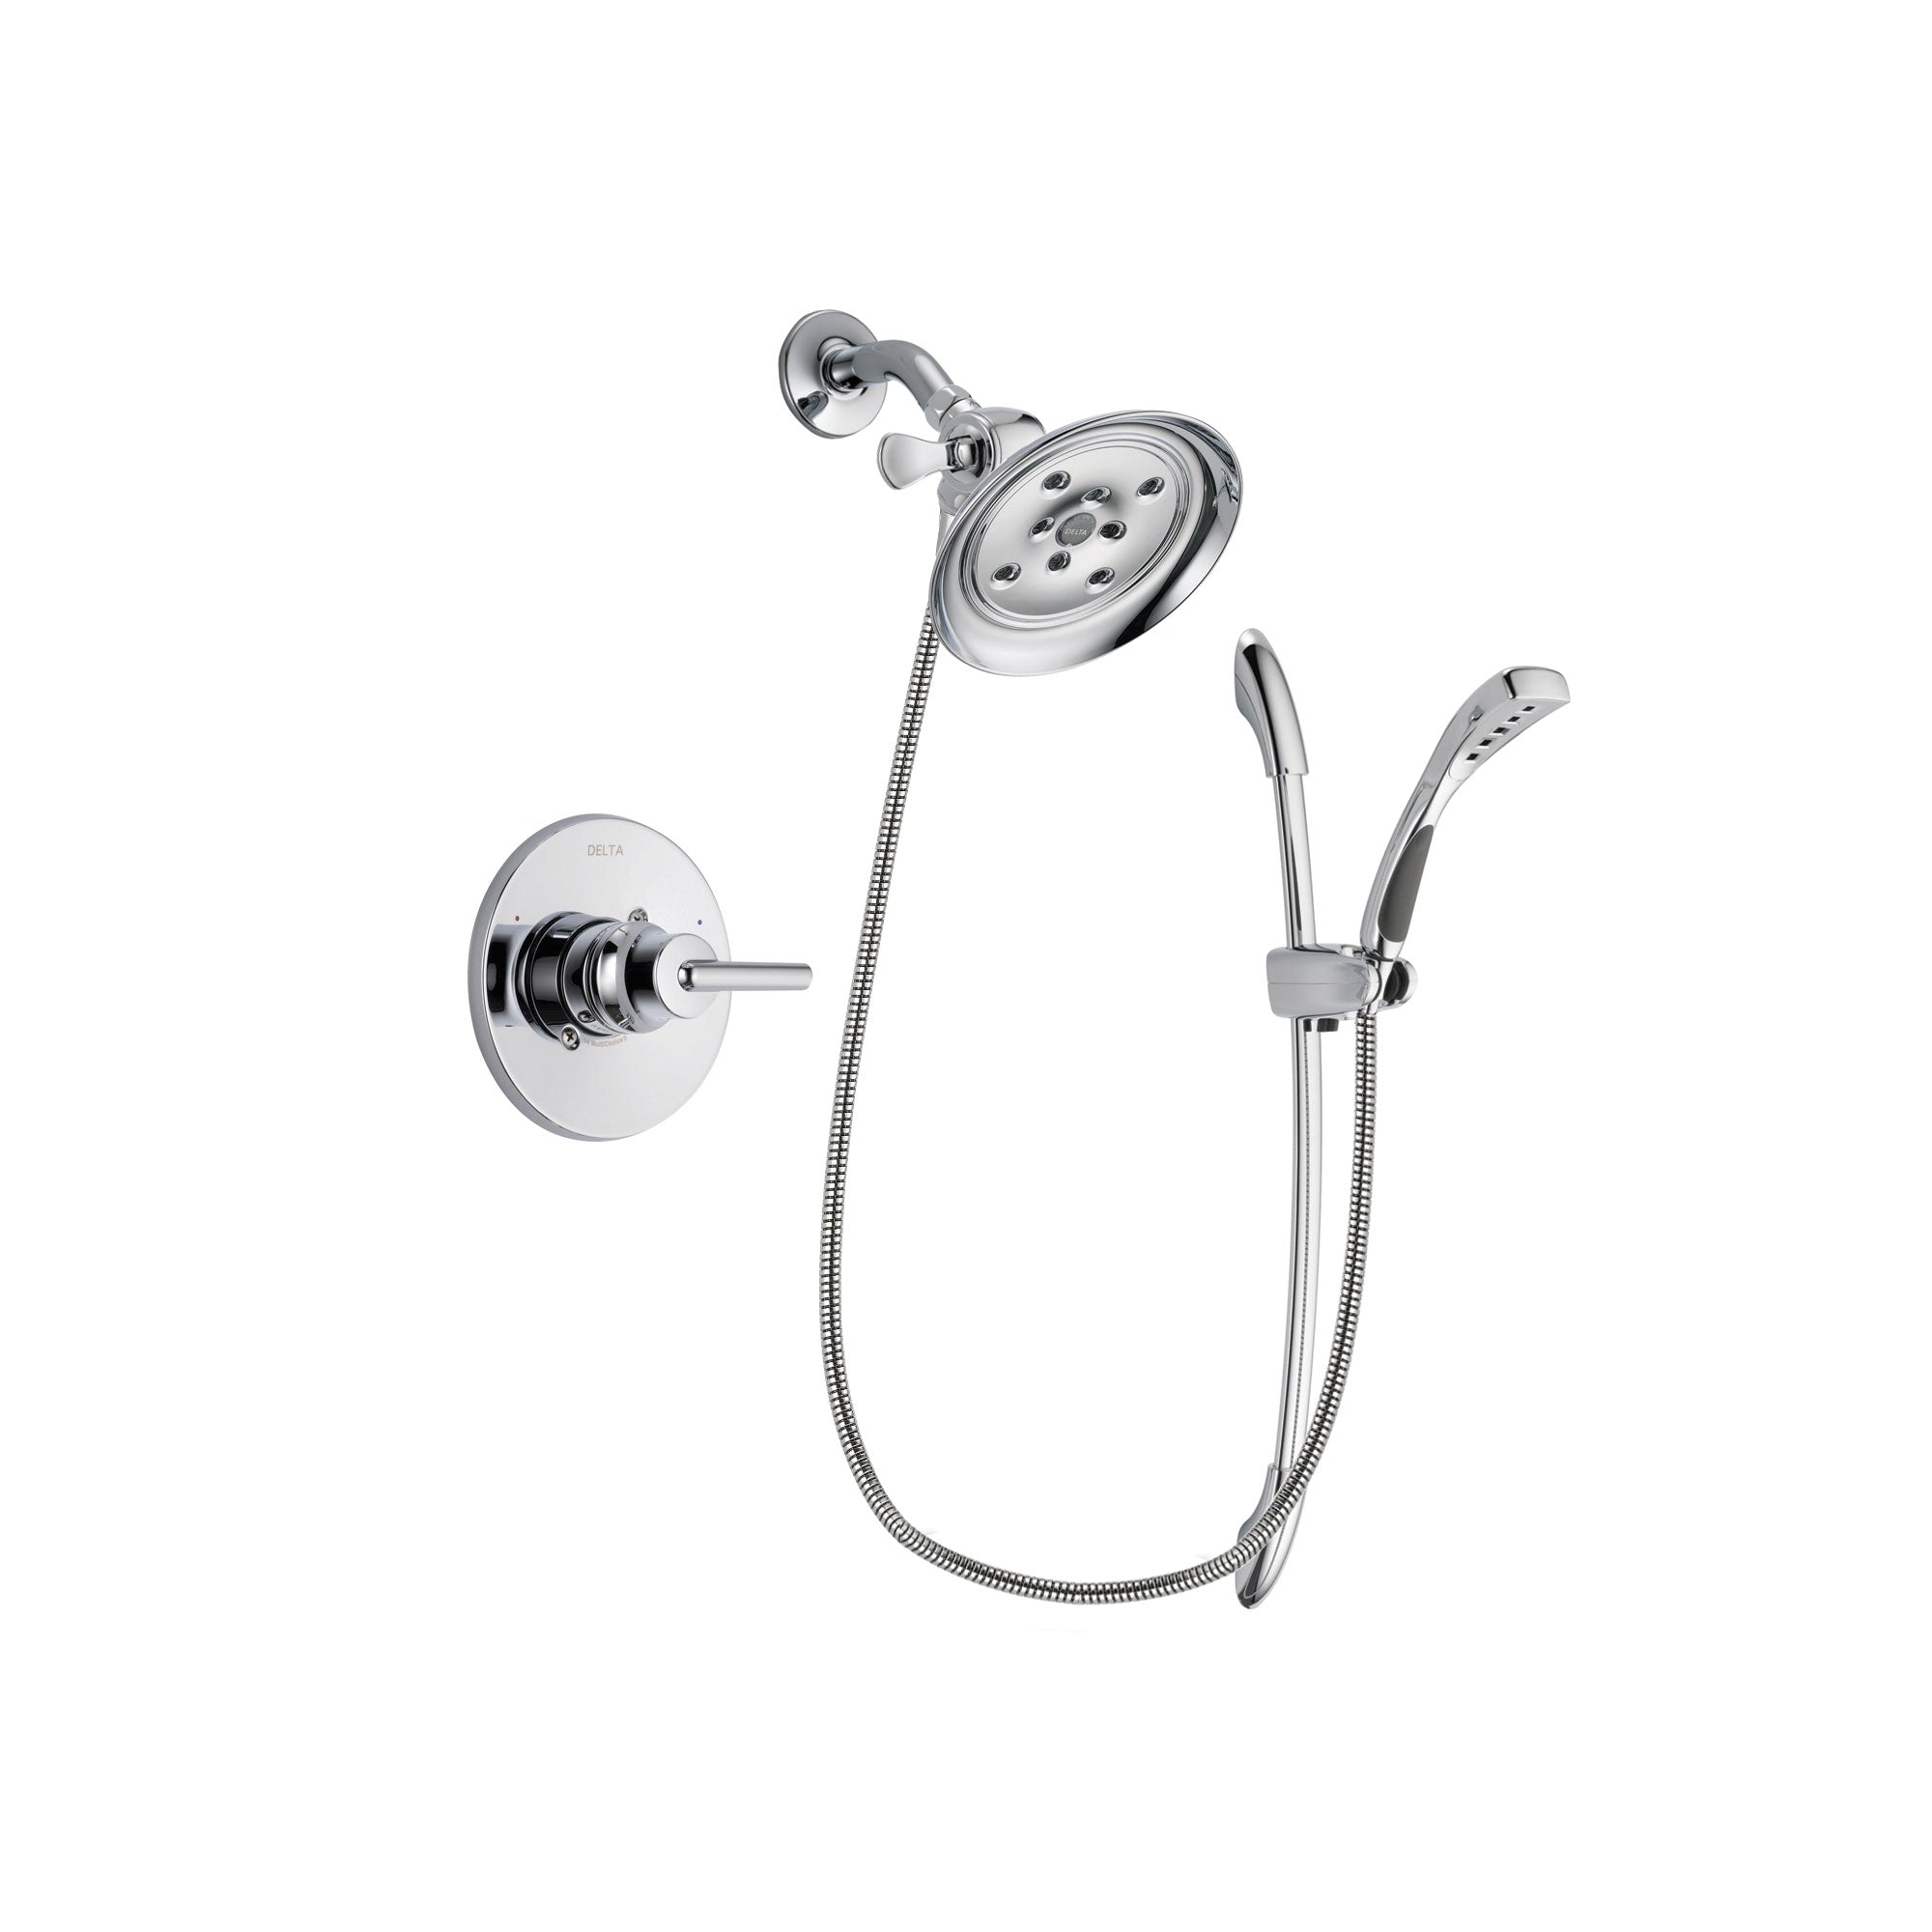 Delta Trinsic Chrome Finish Shower Faucet System Package with Large Rain Showerhead and Handheld Shower with Slide Bar Includes Rough-in Valve DSP0506V